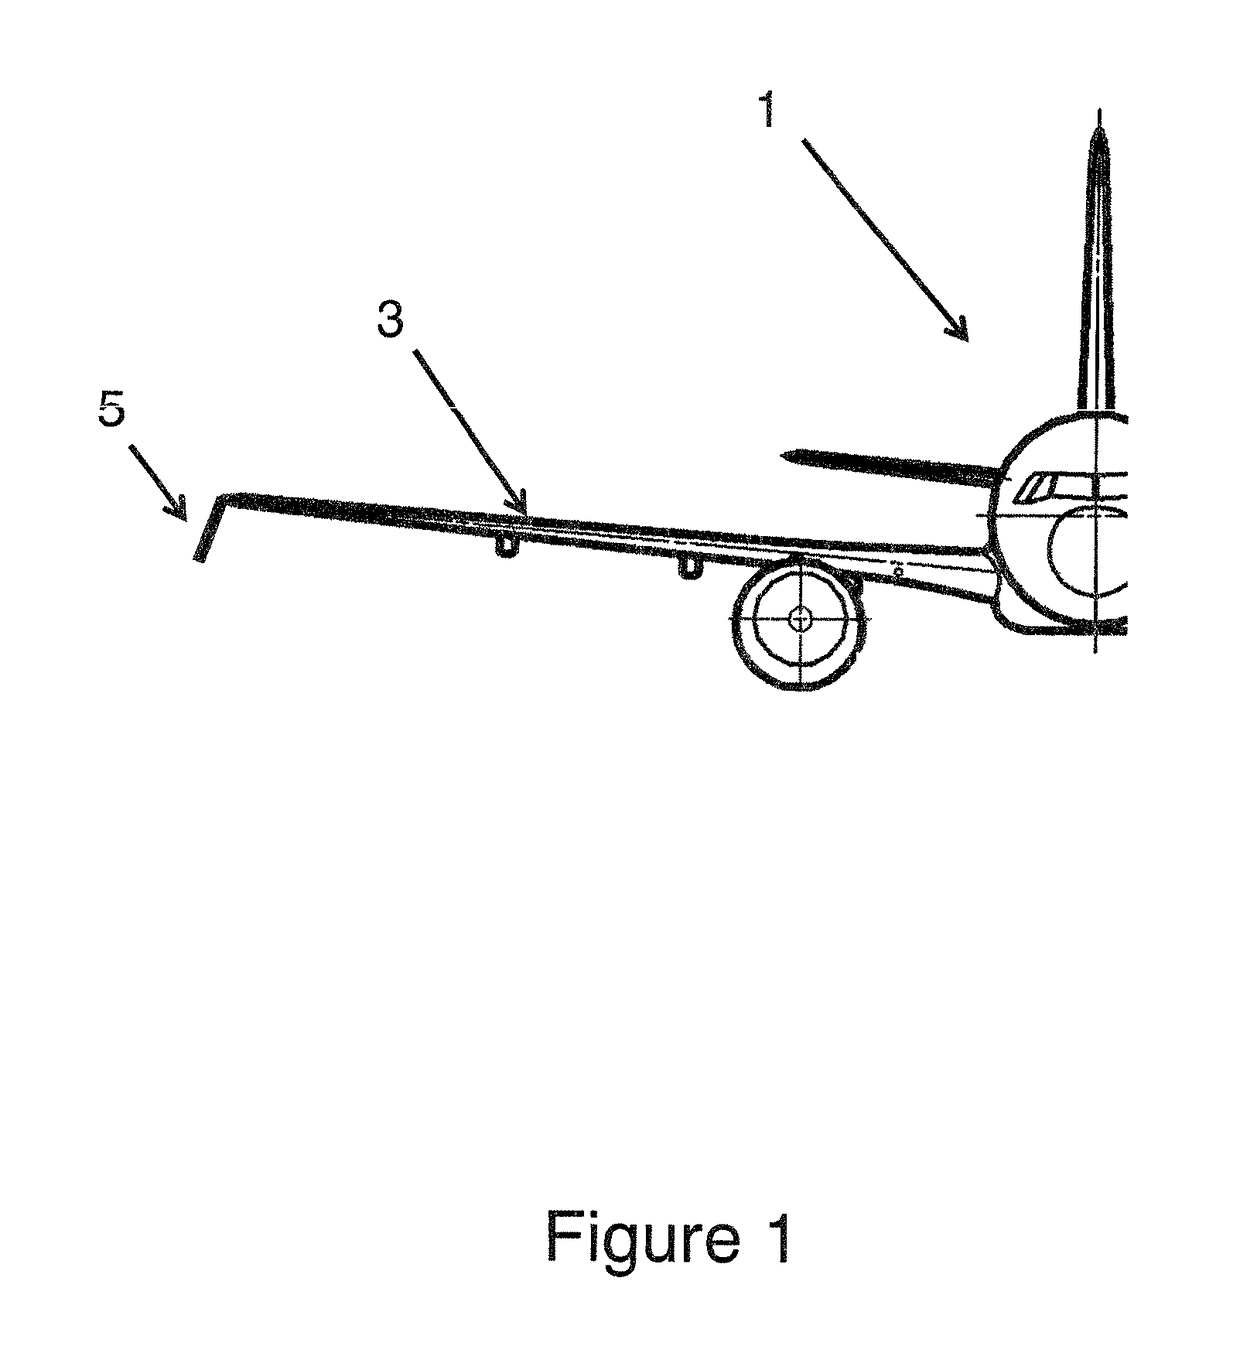 Wing tip device having configurations for flight and ground-based operations